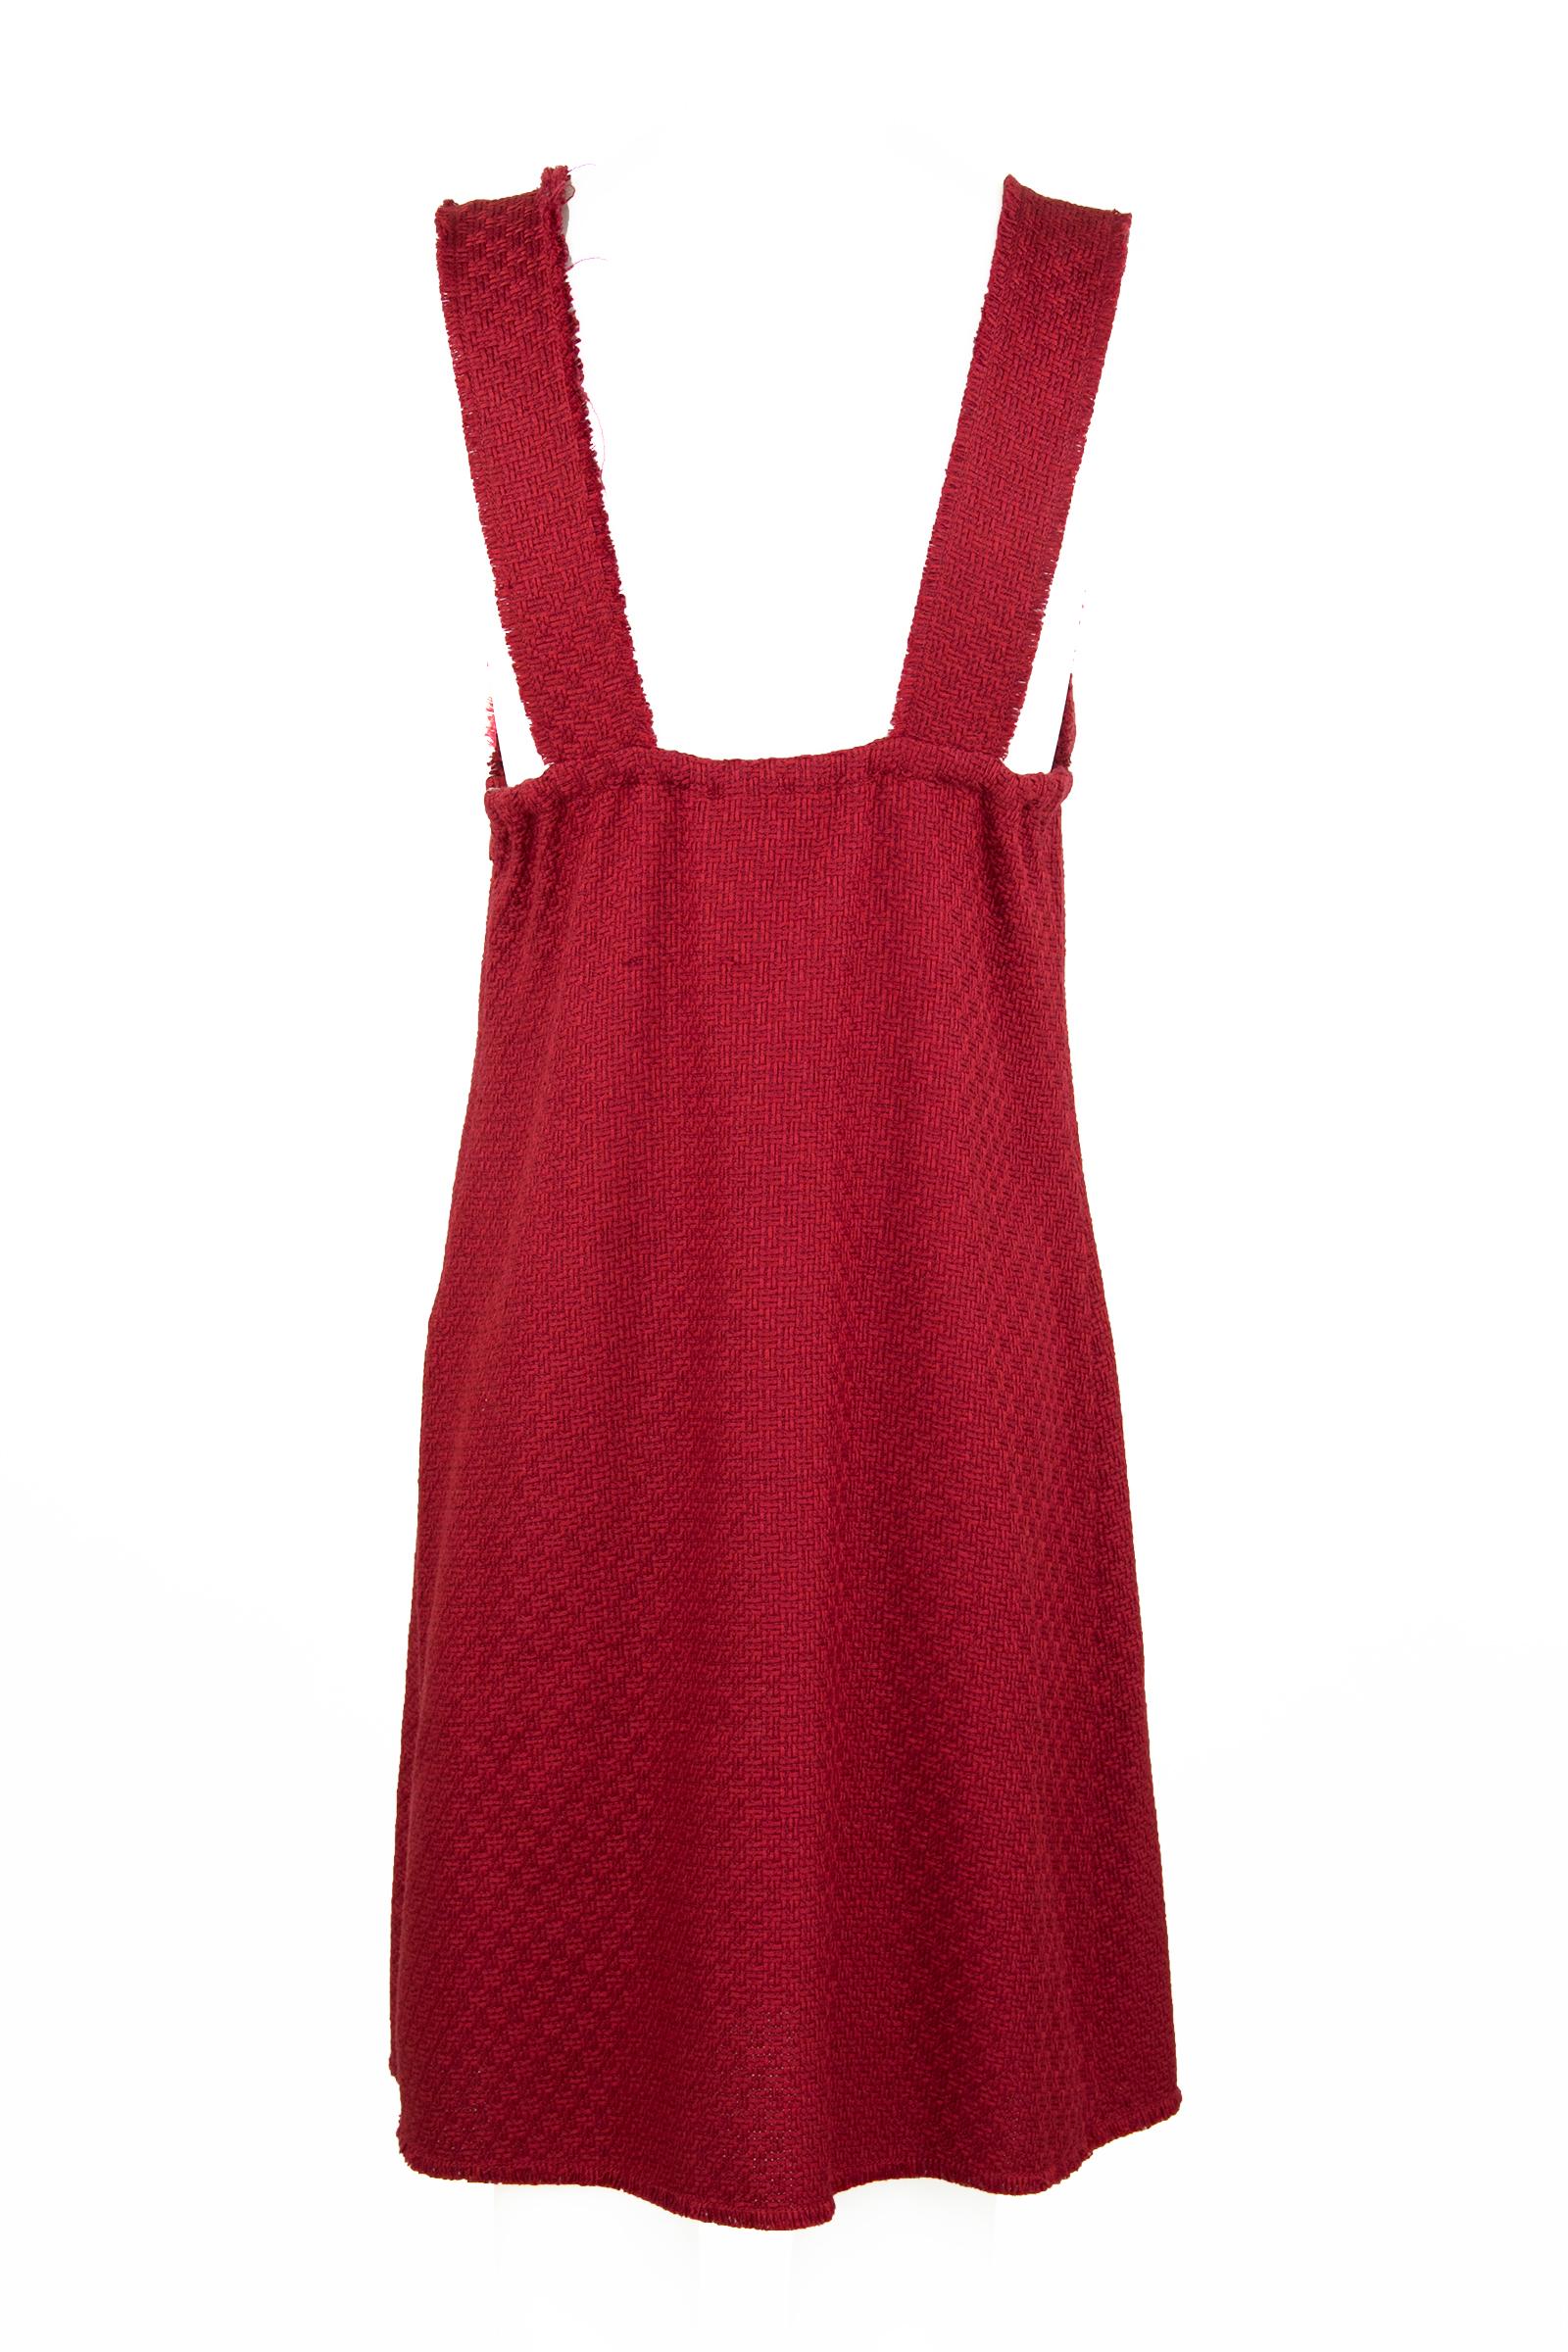 The perfect a-line Chanel dress to throw on for work or wear to a luncheon.  A cotton, wool blend in red with elastic under and around the bust for a snug fit.  Adorable red striped buttons with silver Chanel CC logos.  A perfect look for